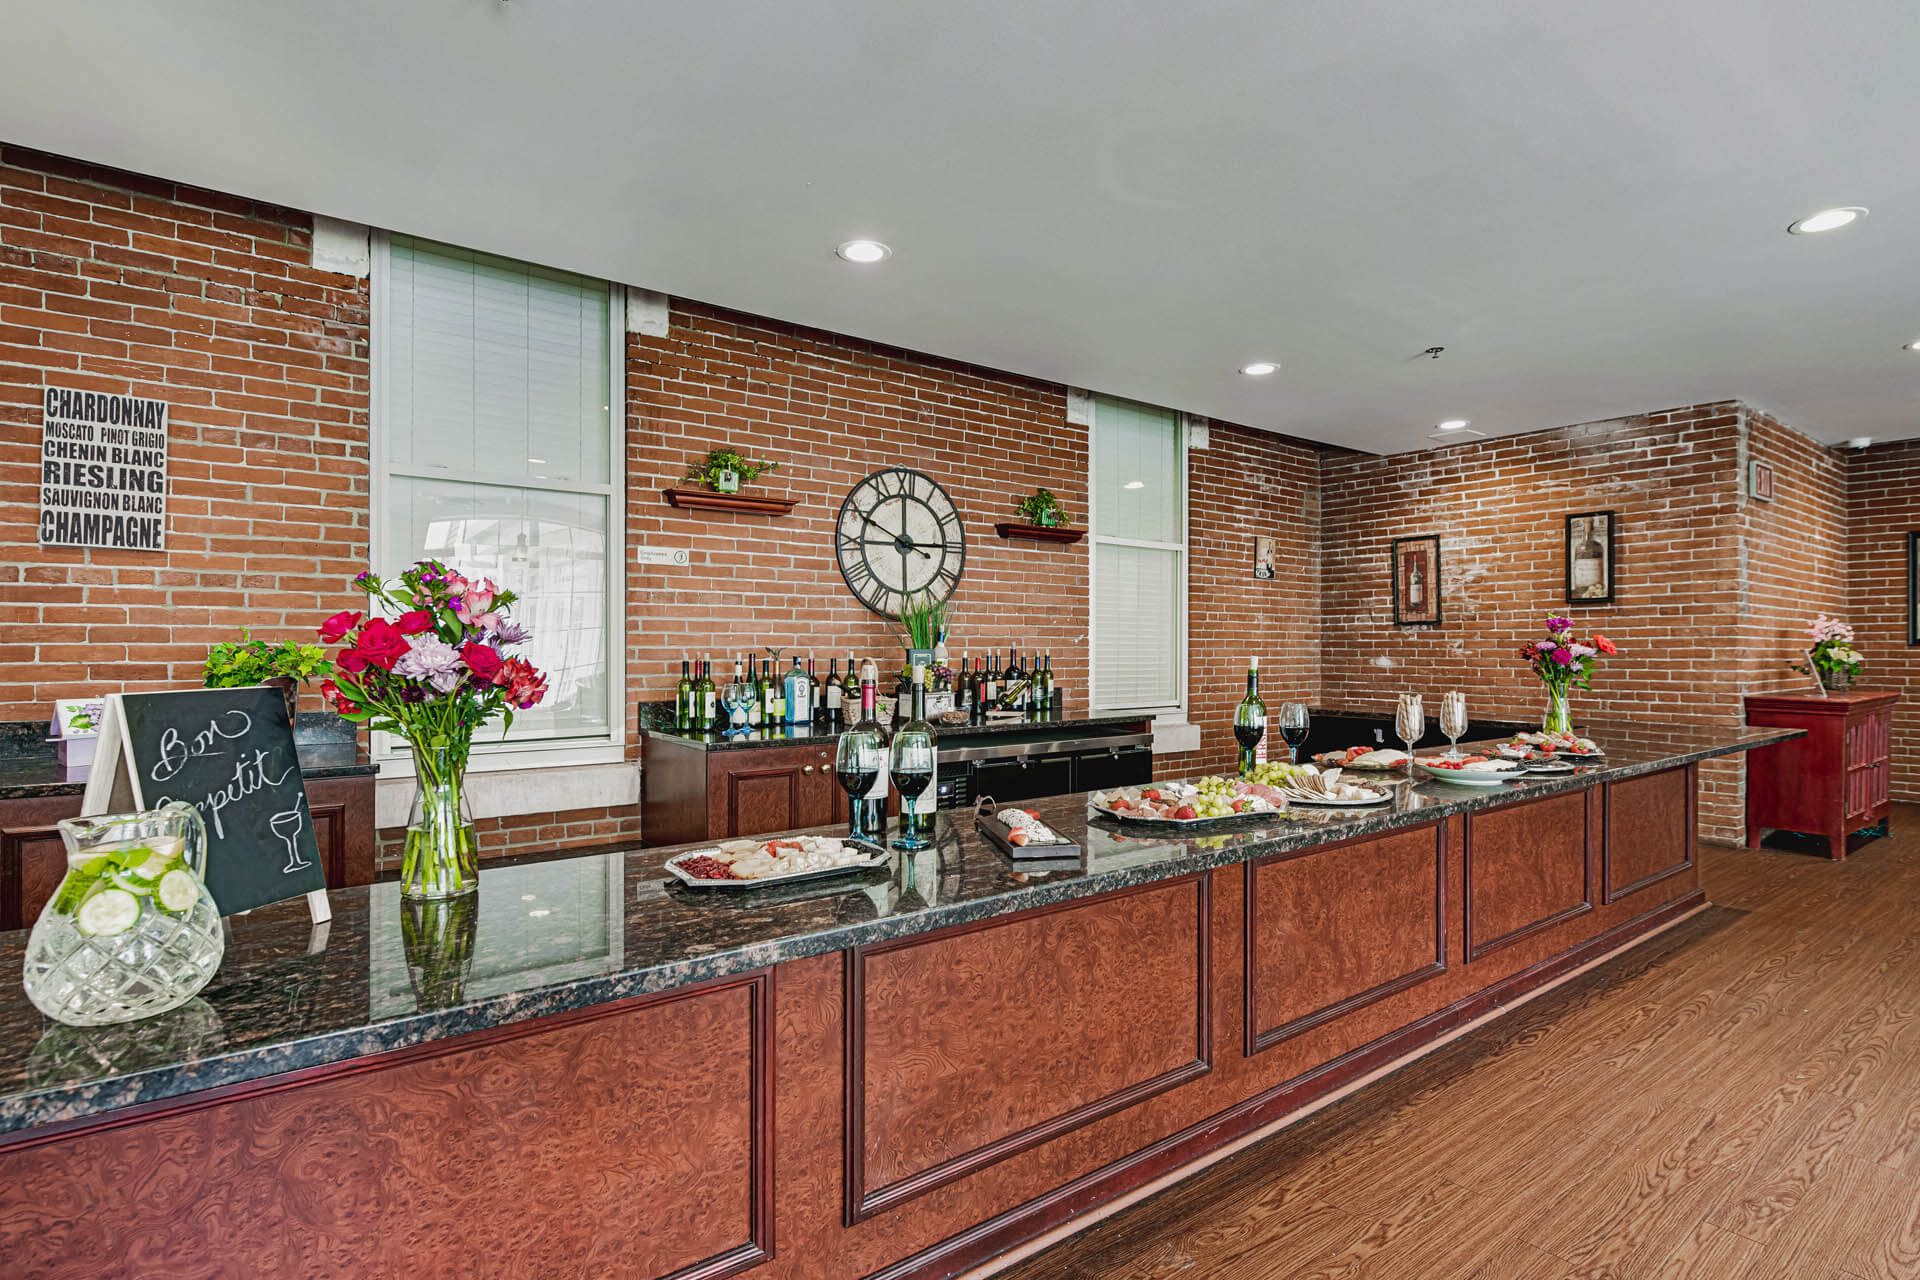 Interior view of Woodbury Mews senior living community with a well-designed kitchen, cafeteria, and floral decor.